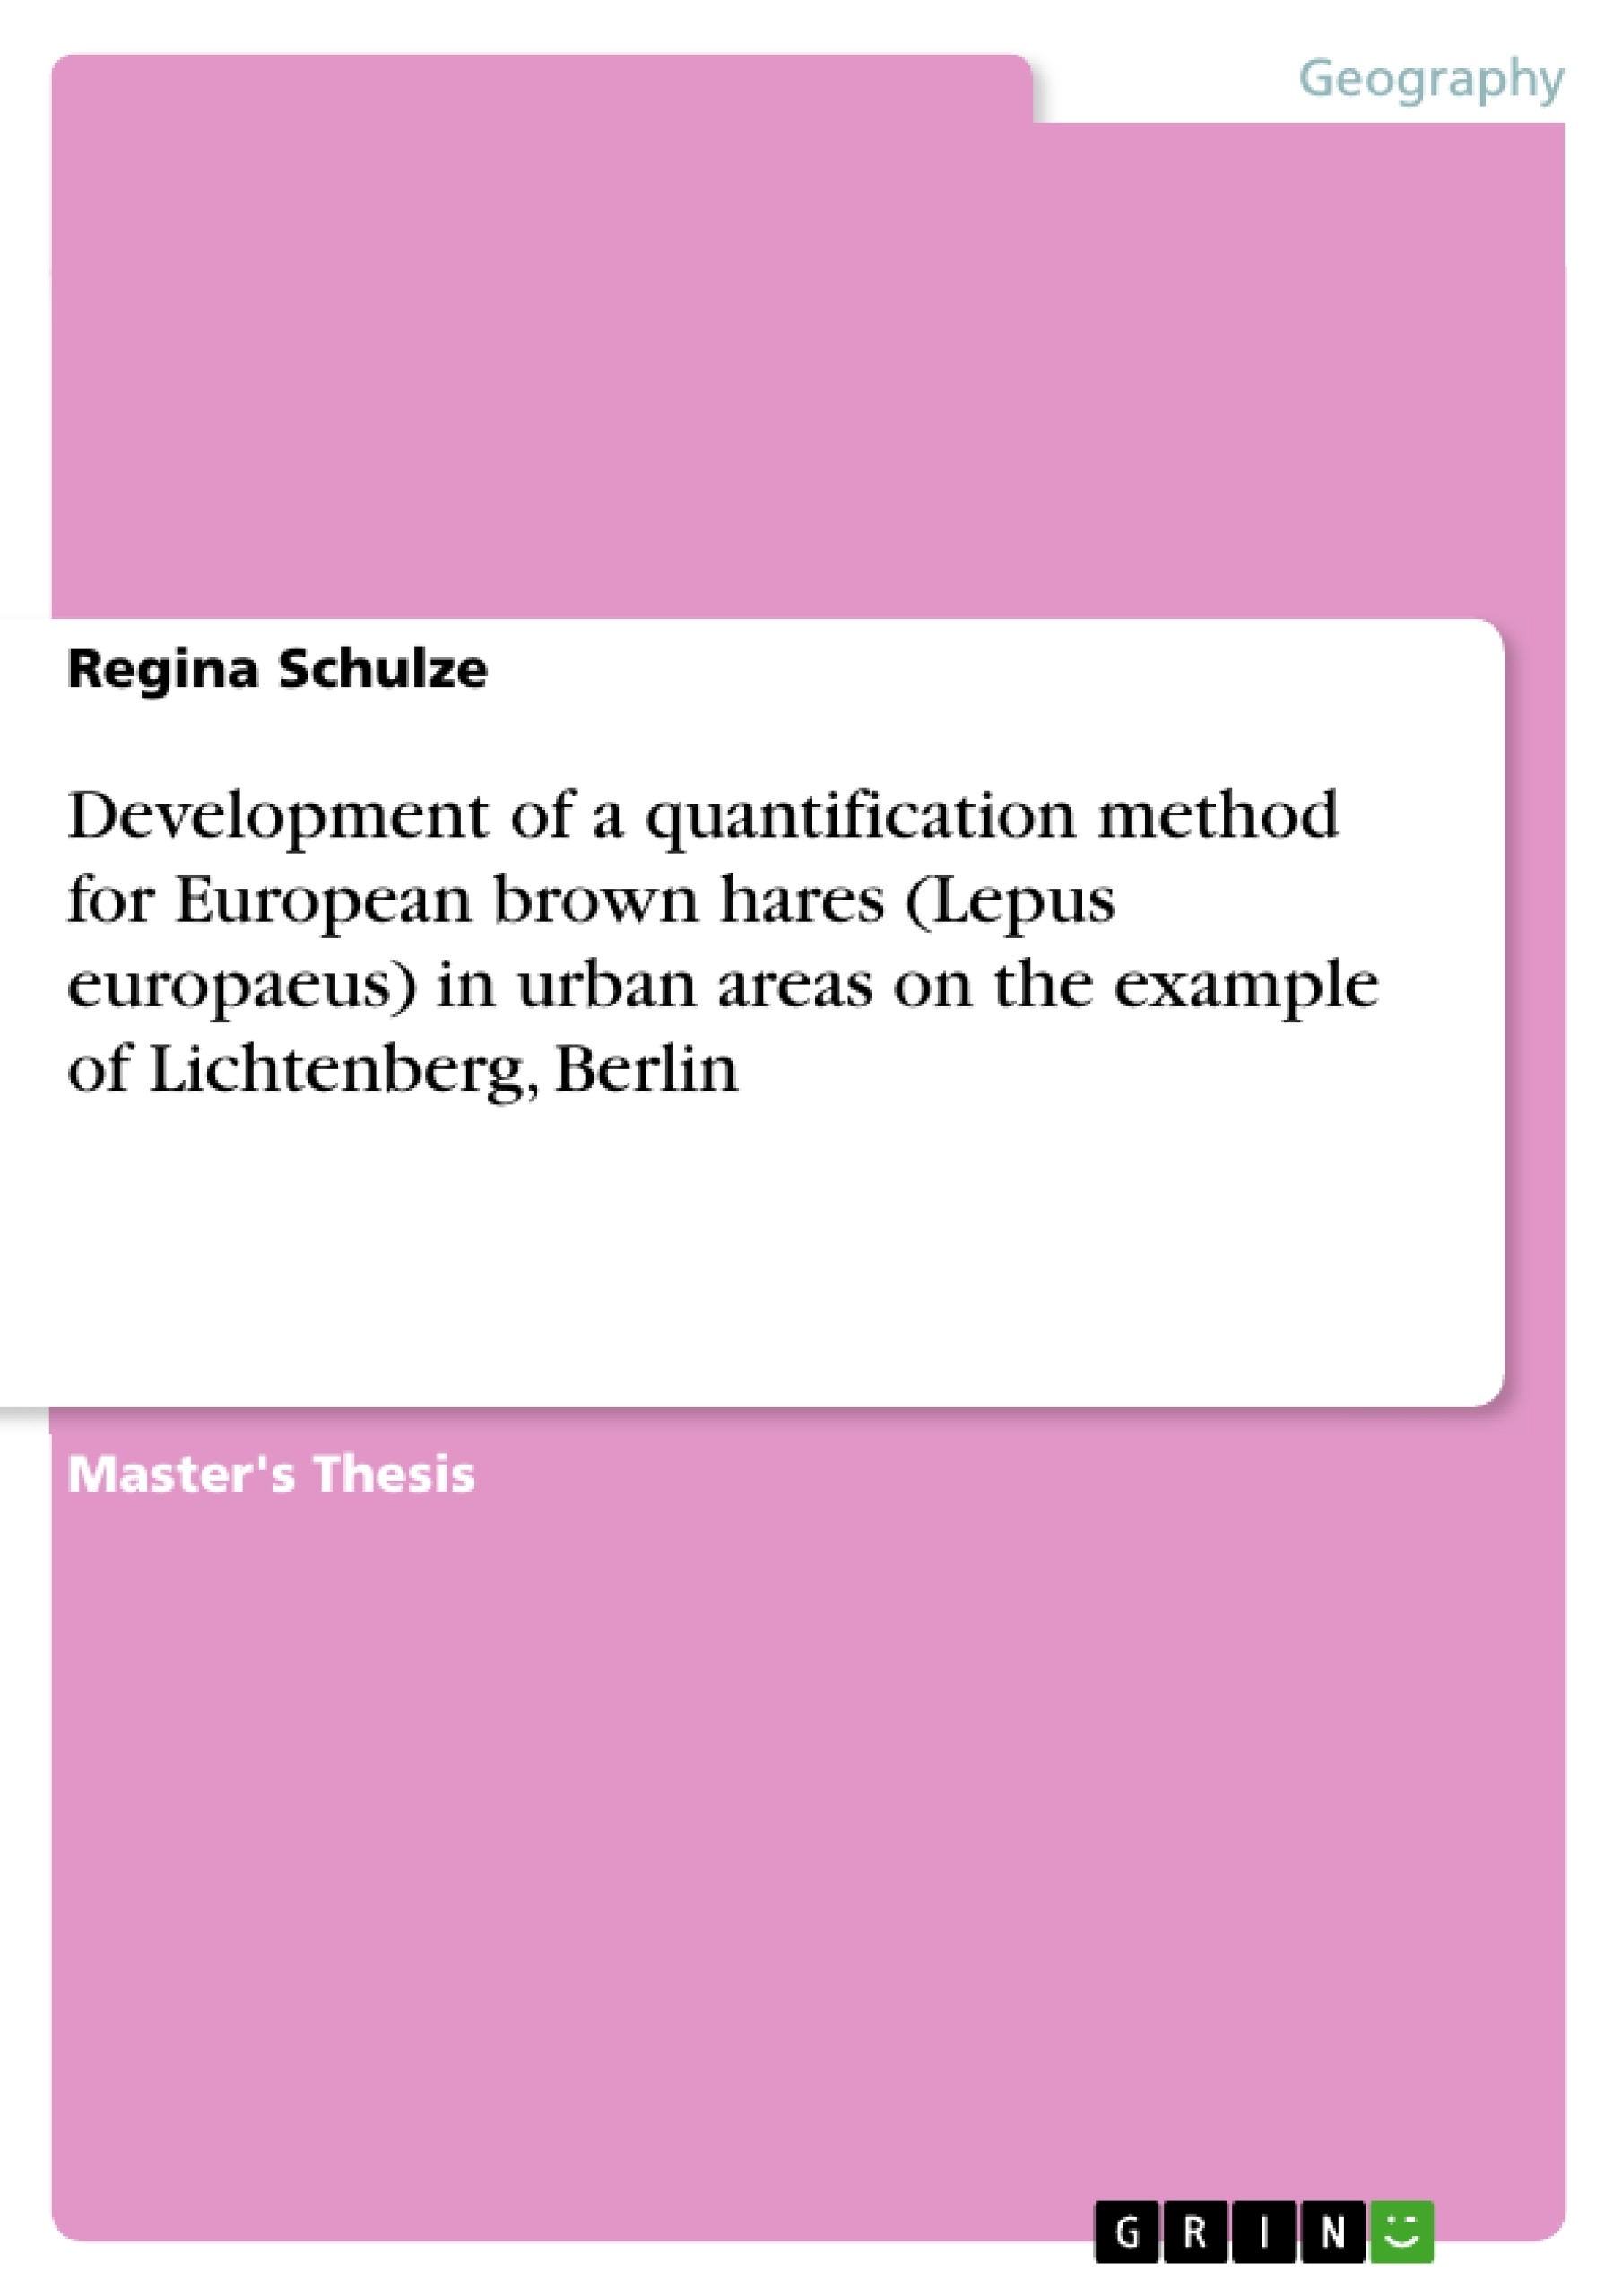 Titre: Development of a quantification method for European brown hares (Lepus europaeus) in urban areas on the example of Lichtenberg, Berlin